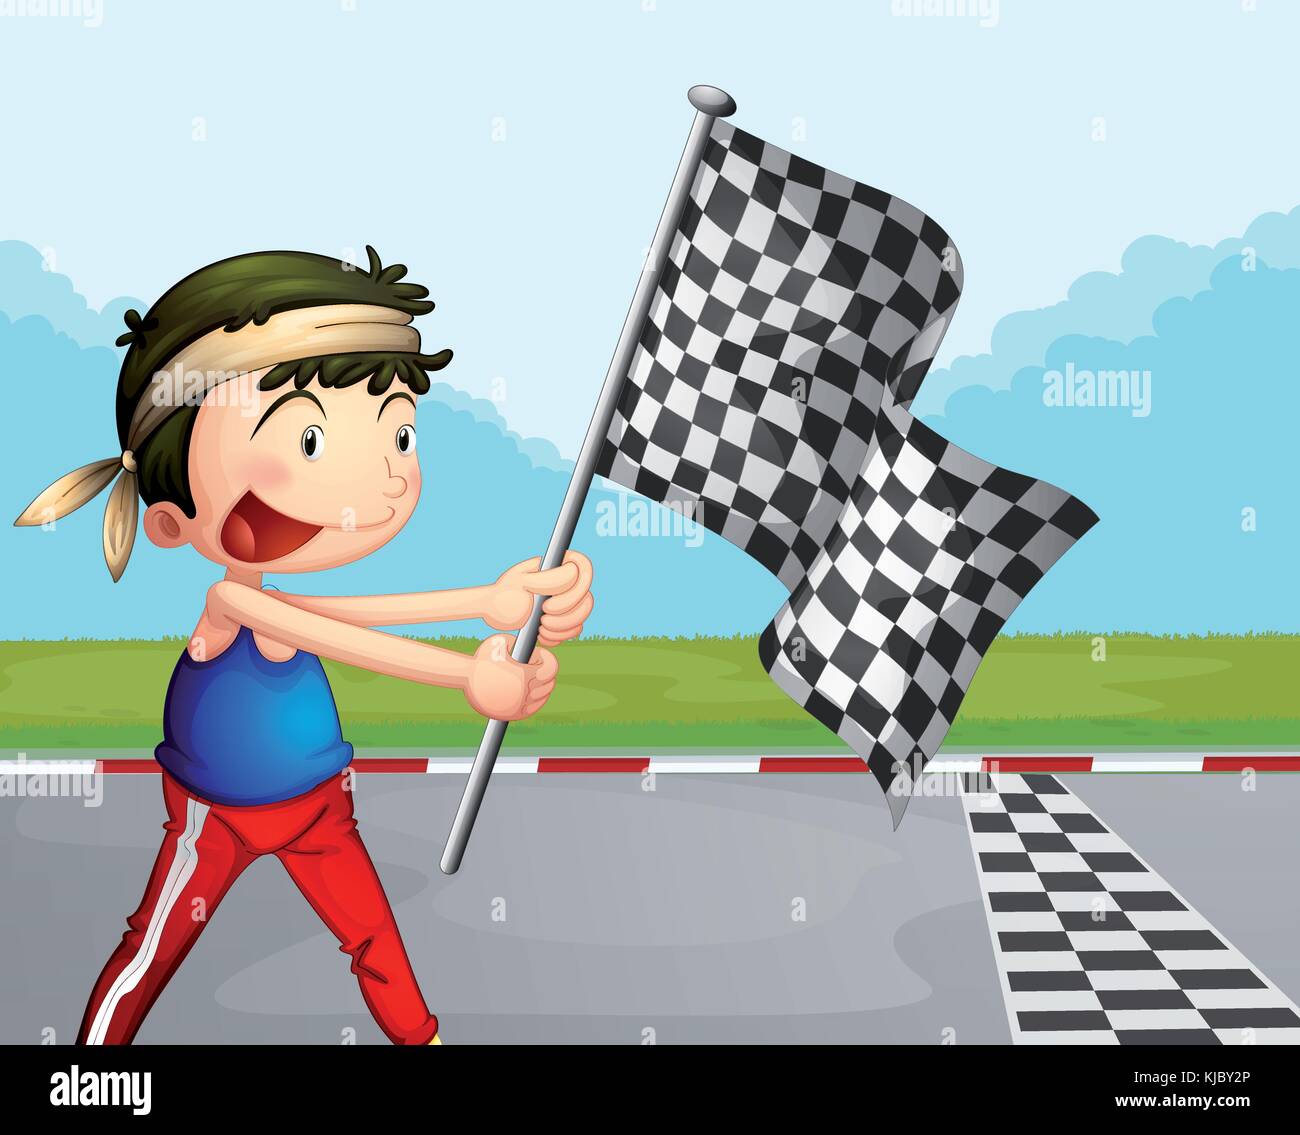 Illustration of a young boy holding a checkered banner Stock Vector